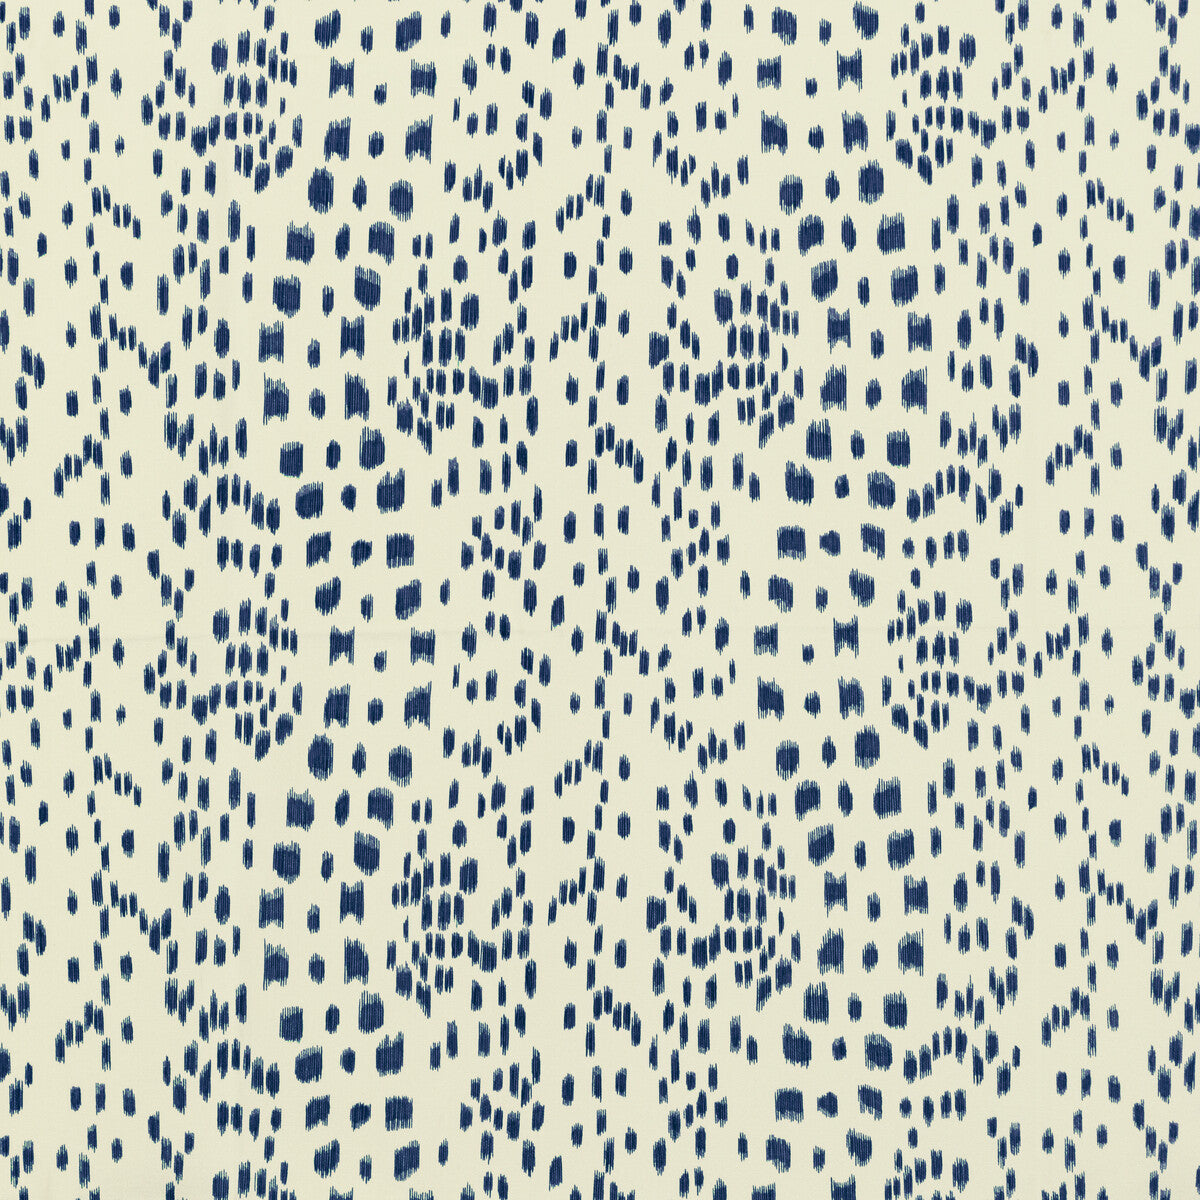 Les Touches II fabric in navy color - pattern 8020131.50.0 - by Brunschwig &amp; Fils in the En Vacances II collection